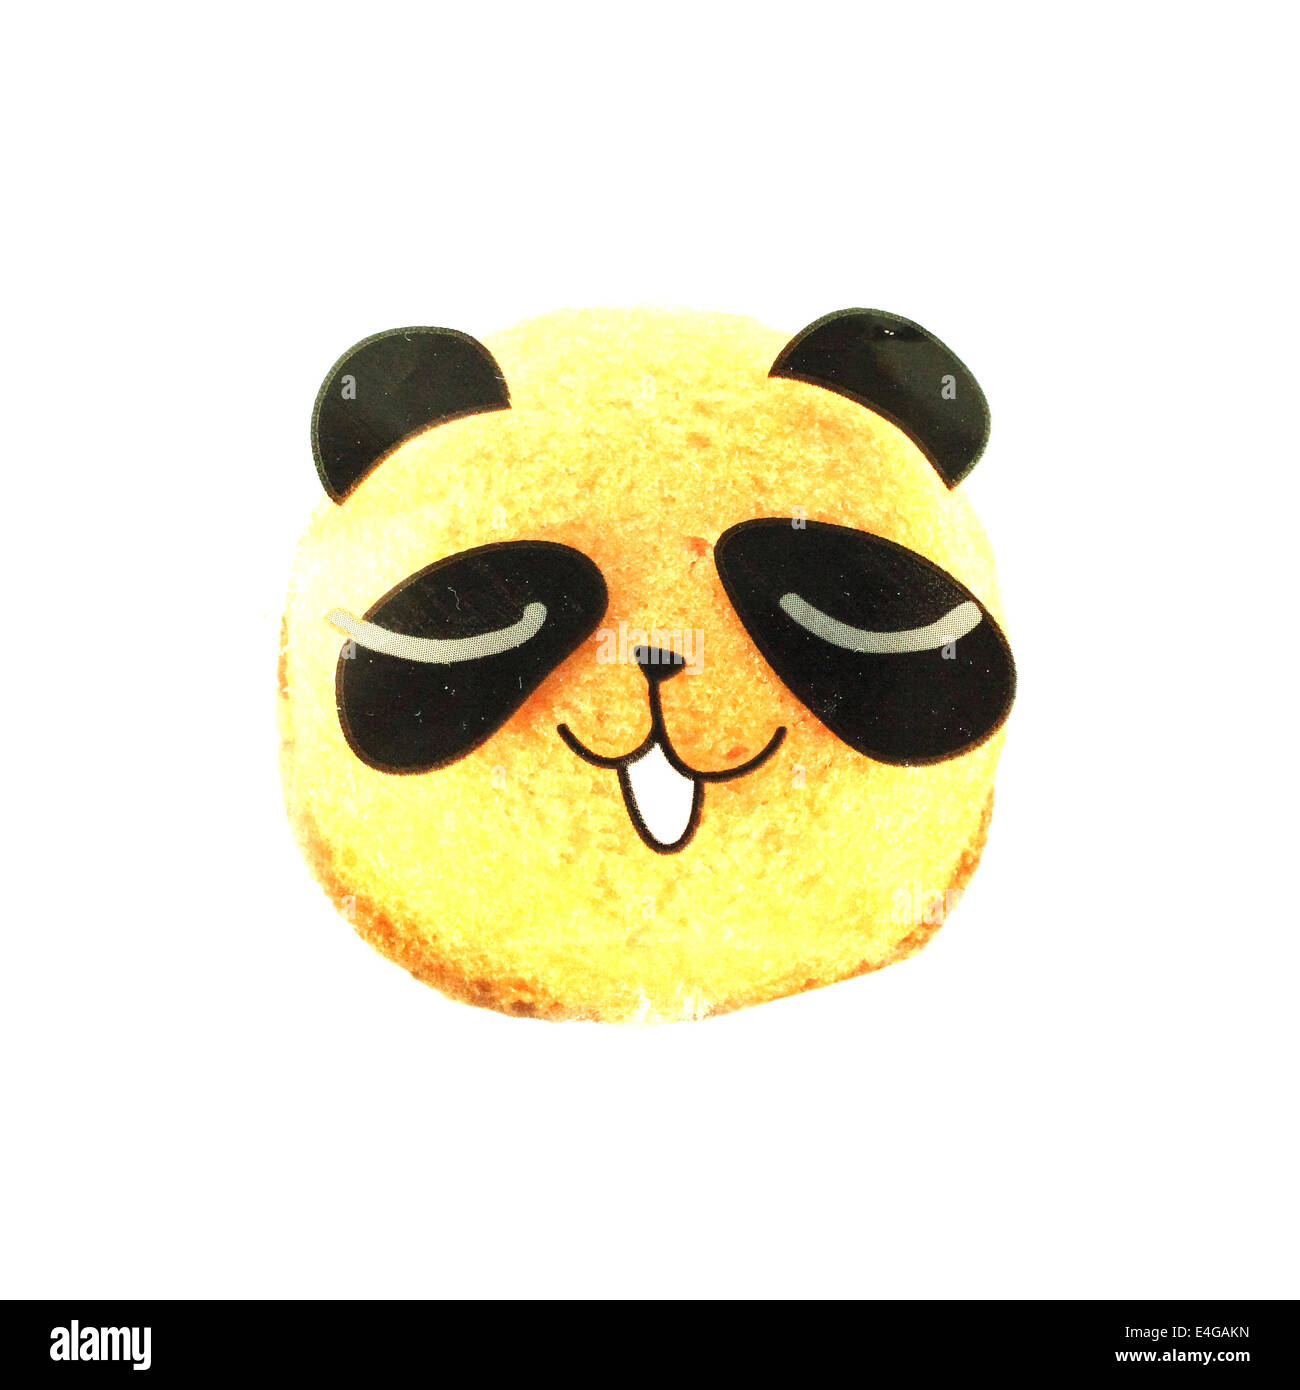 The panda bread on a white background Stock Photo